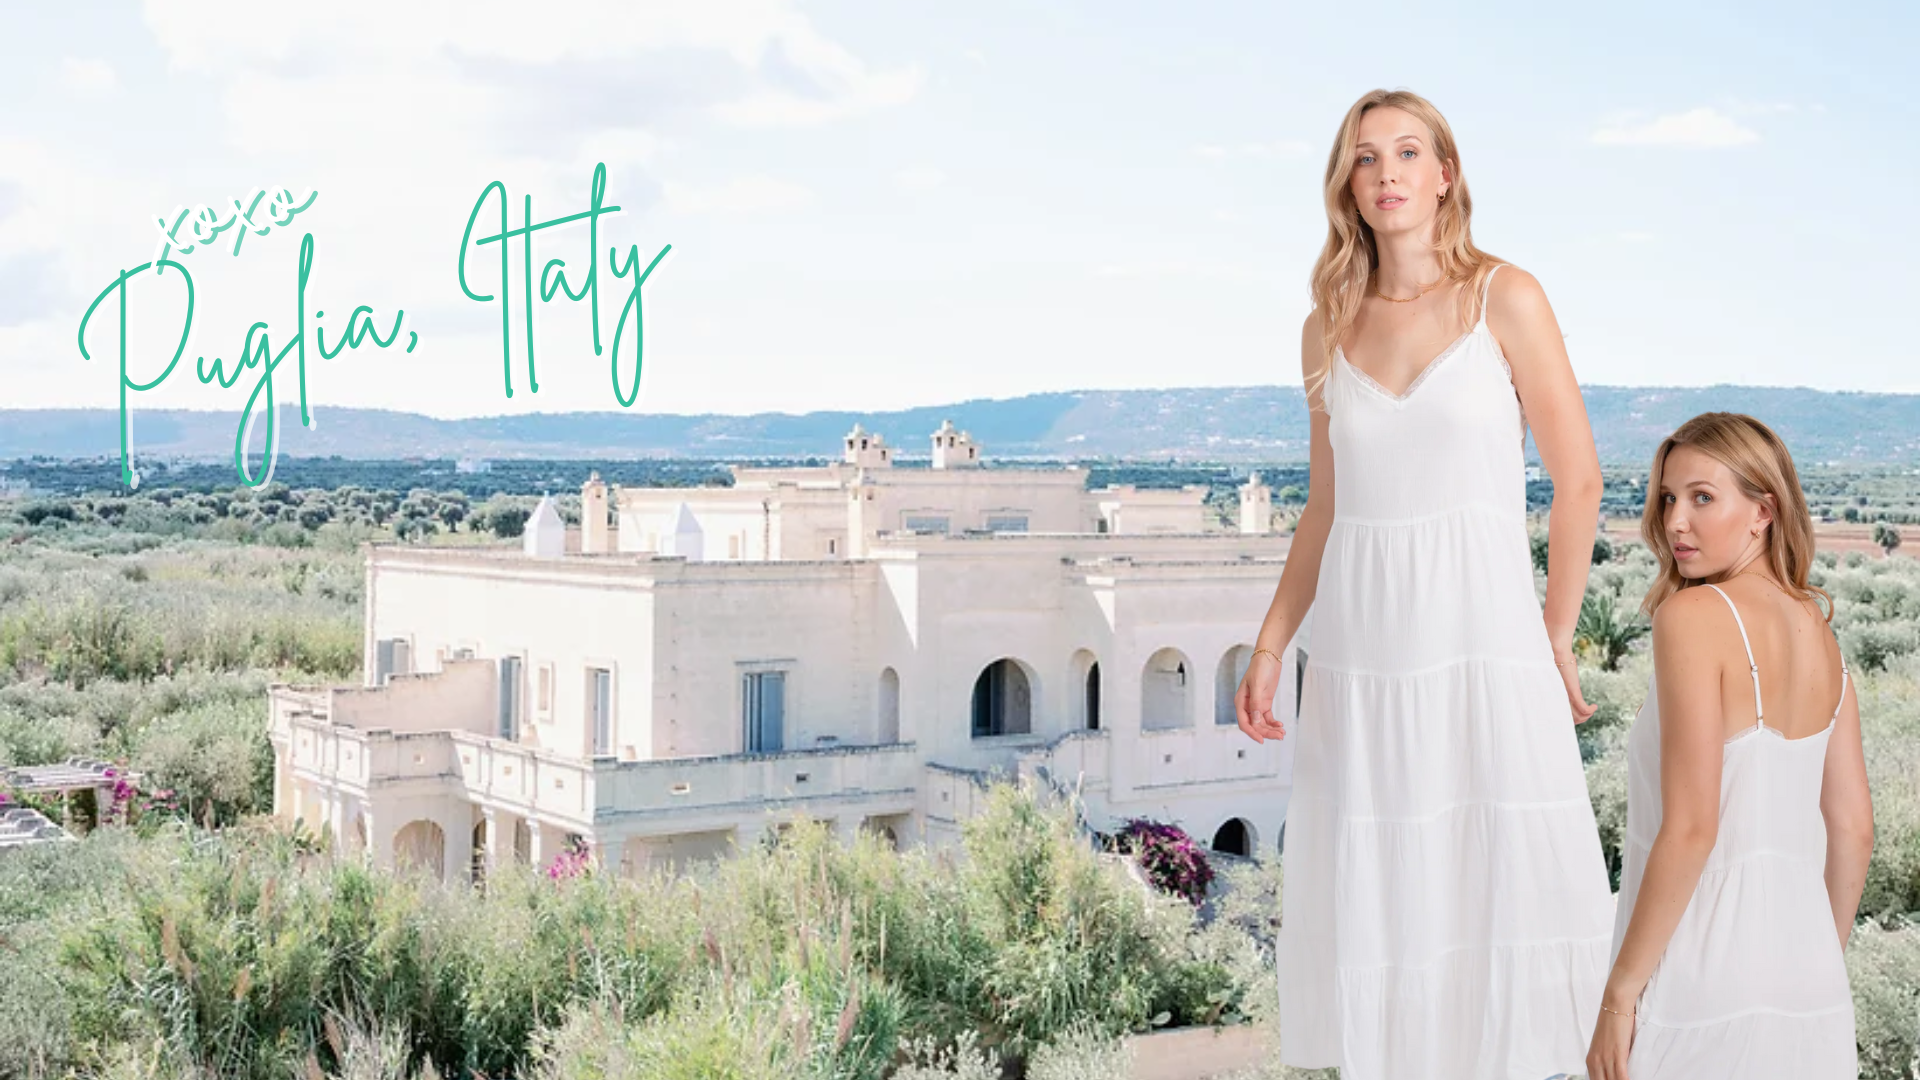 puglia italy destination wedding inspiration - wedding dresses and venue for planning wedding ideas and outfit inspo at Koy resort blog 